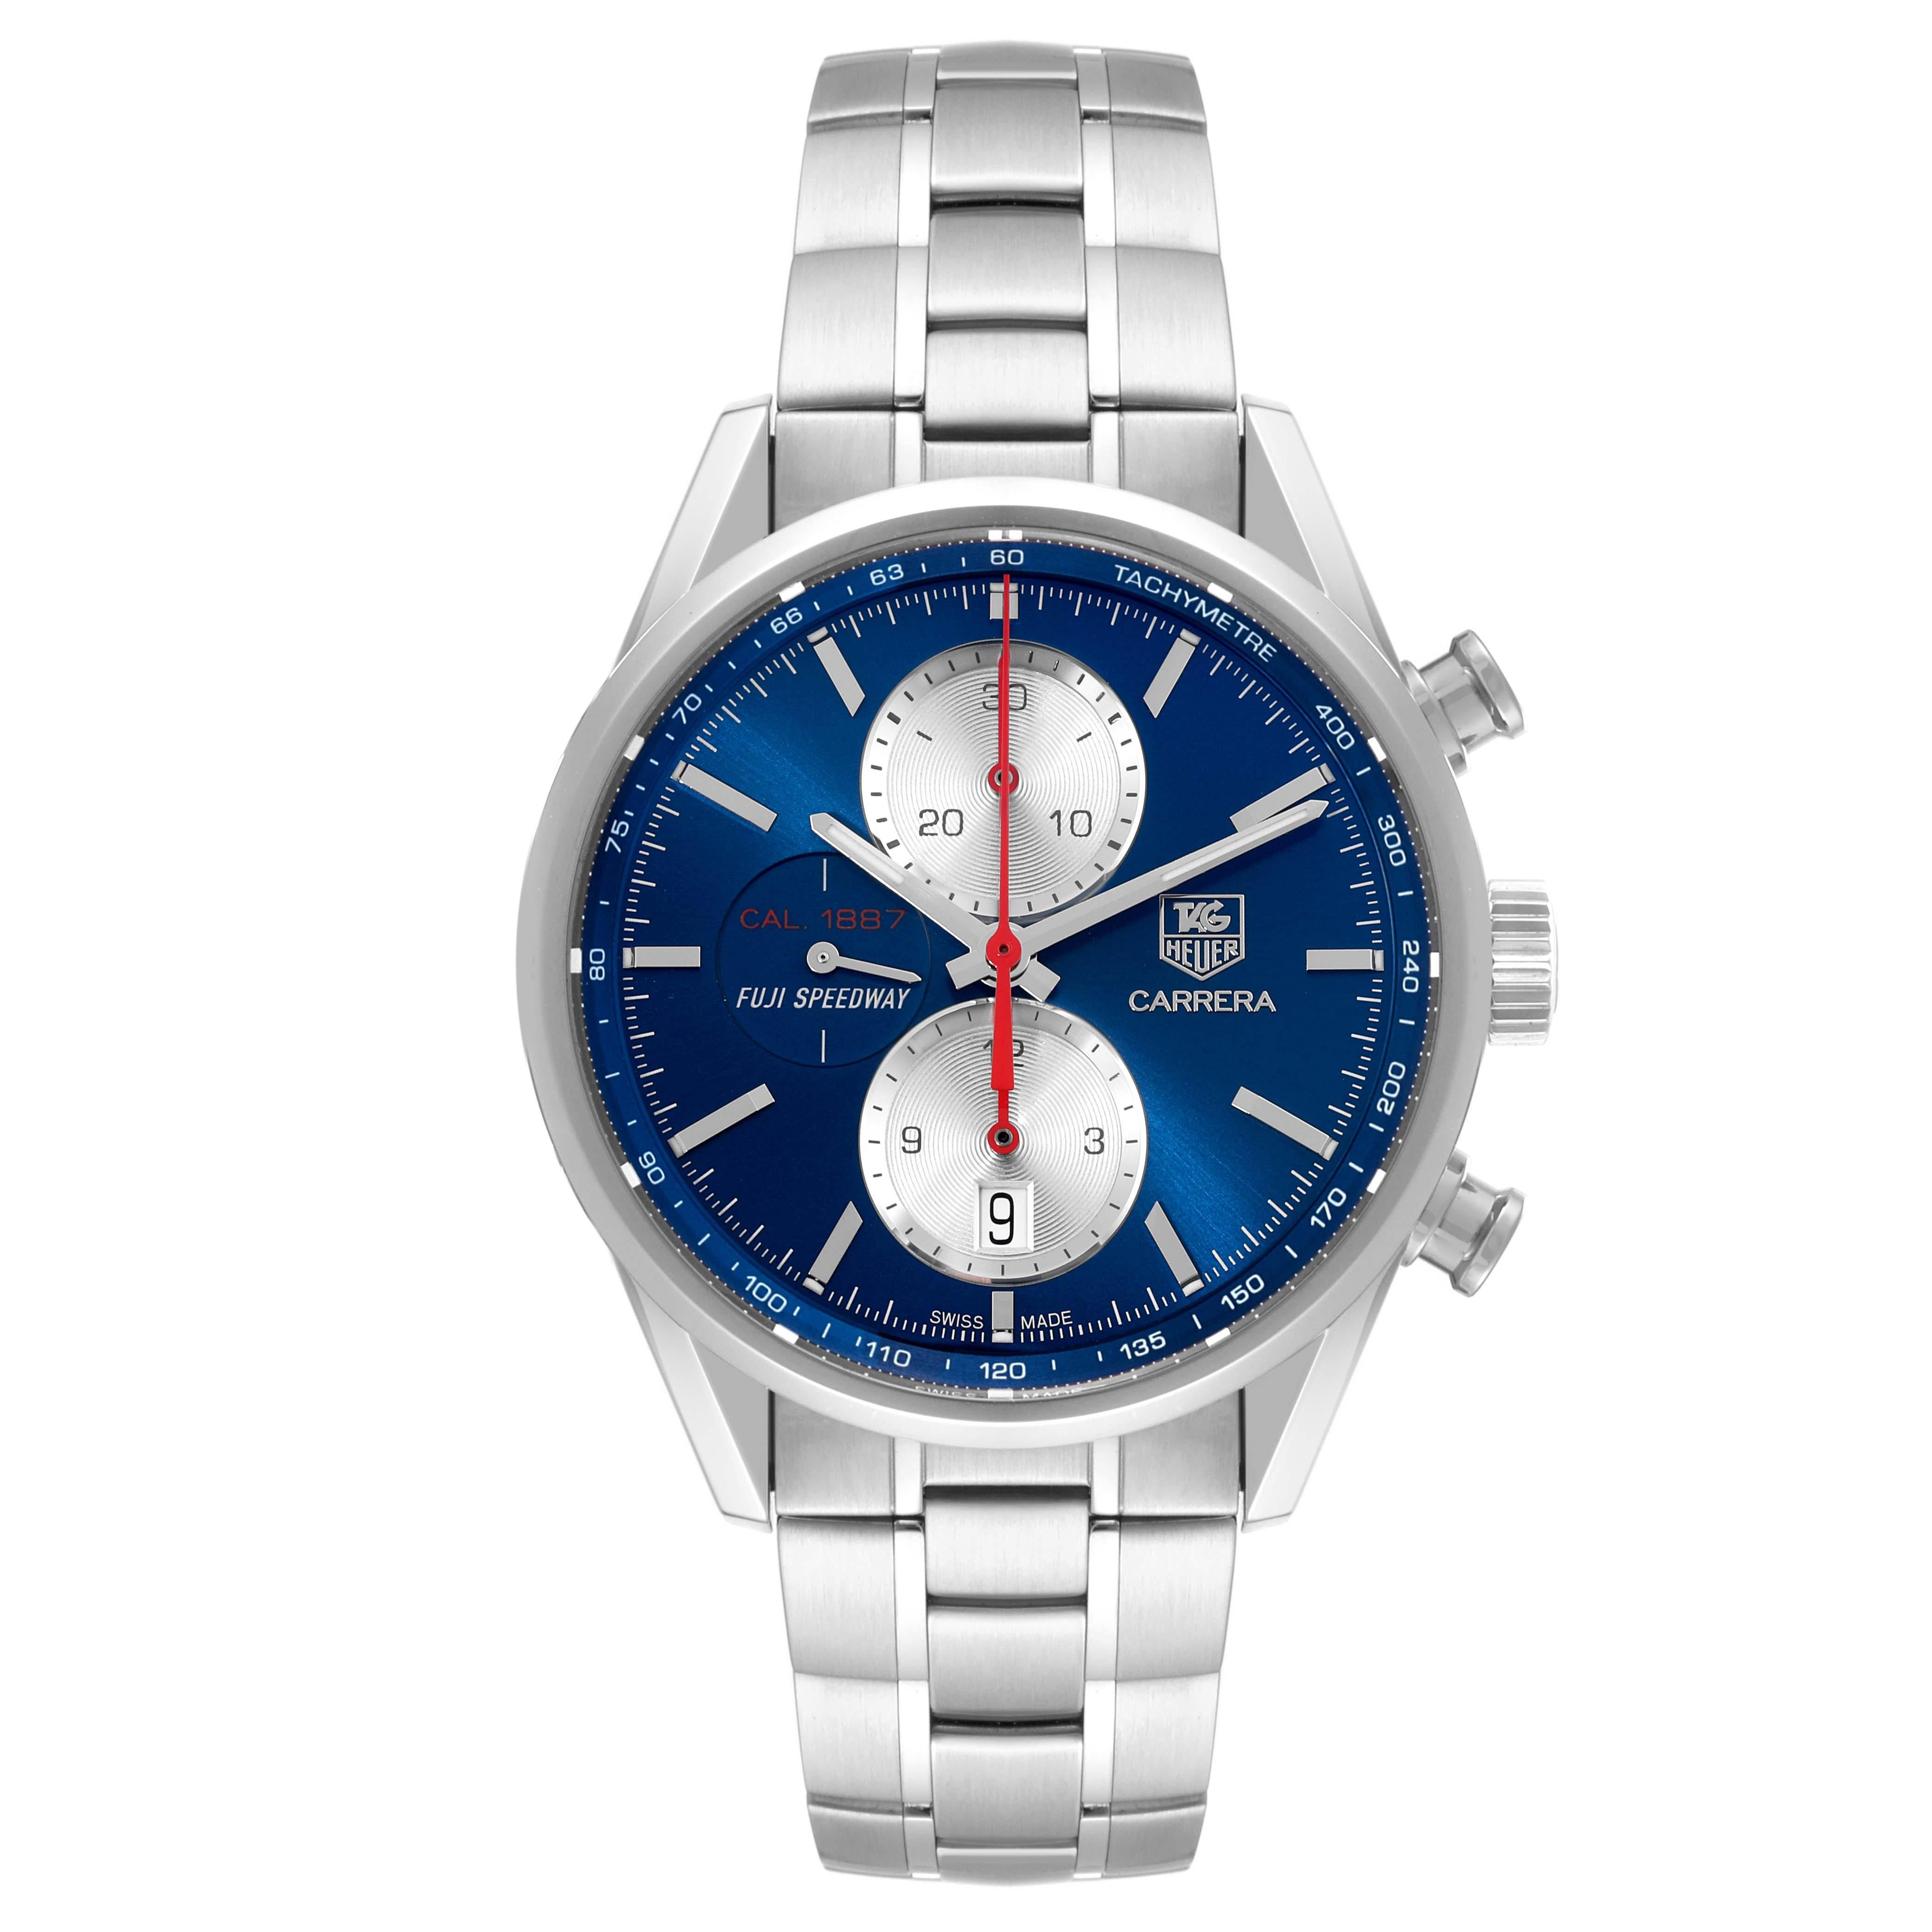 Tag Heuer Carrera Fuji Speedway Limited Edition Steel Mens Watch CAR211B Box Card. Automatic self-winding chronograph movement. Stainless steel round case 41.0 mm. Exhibition transparent sapphire crystal caseback. Stainless steel bezel. Scratch